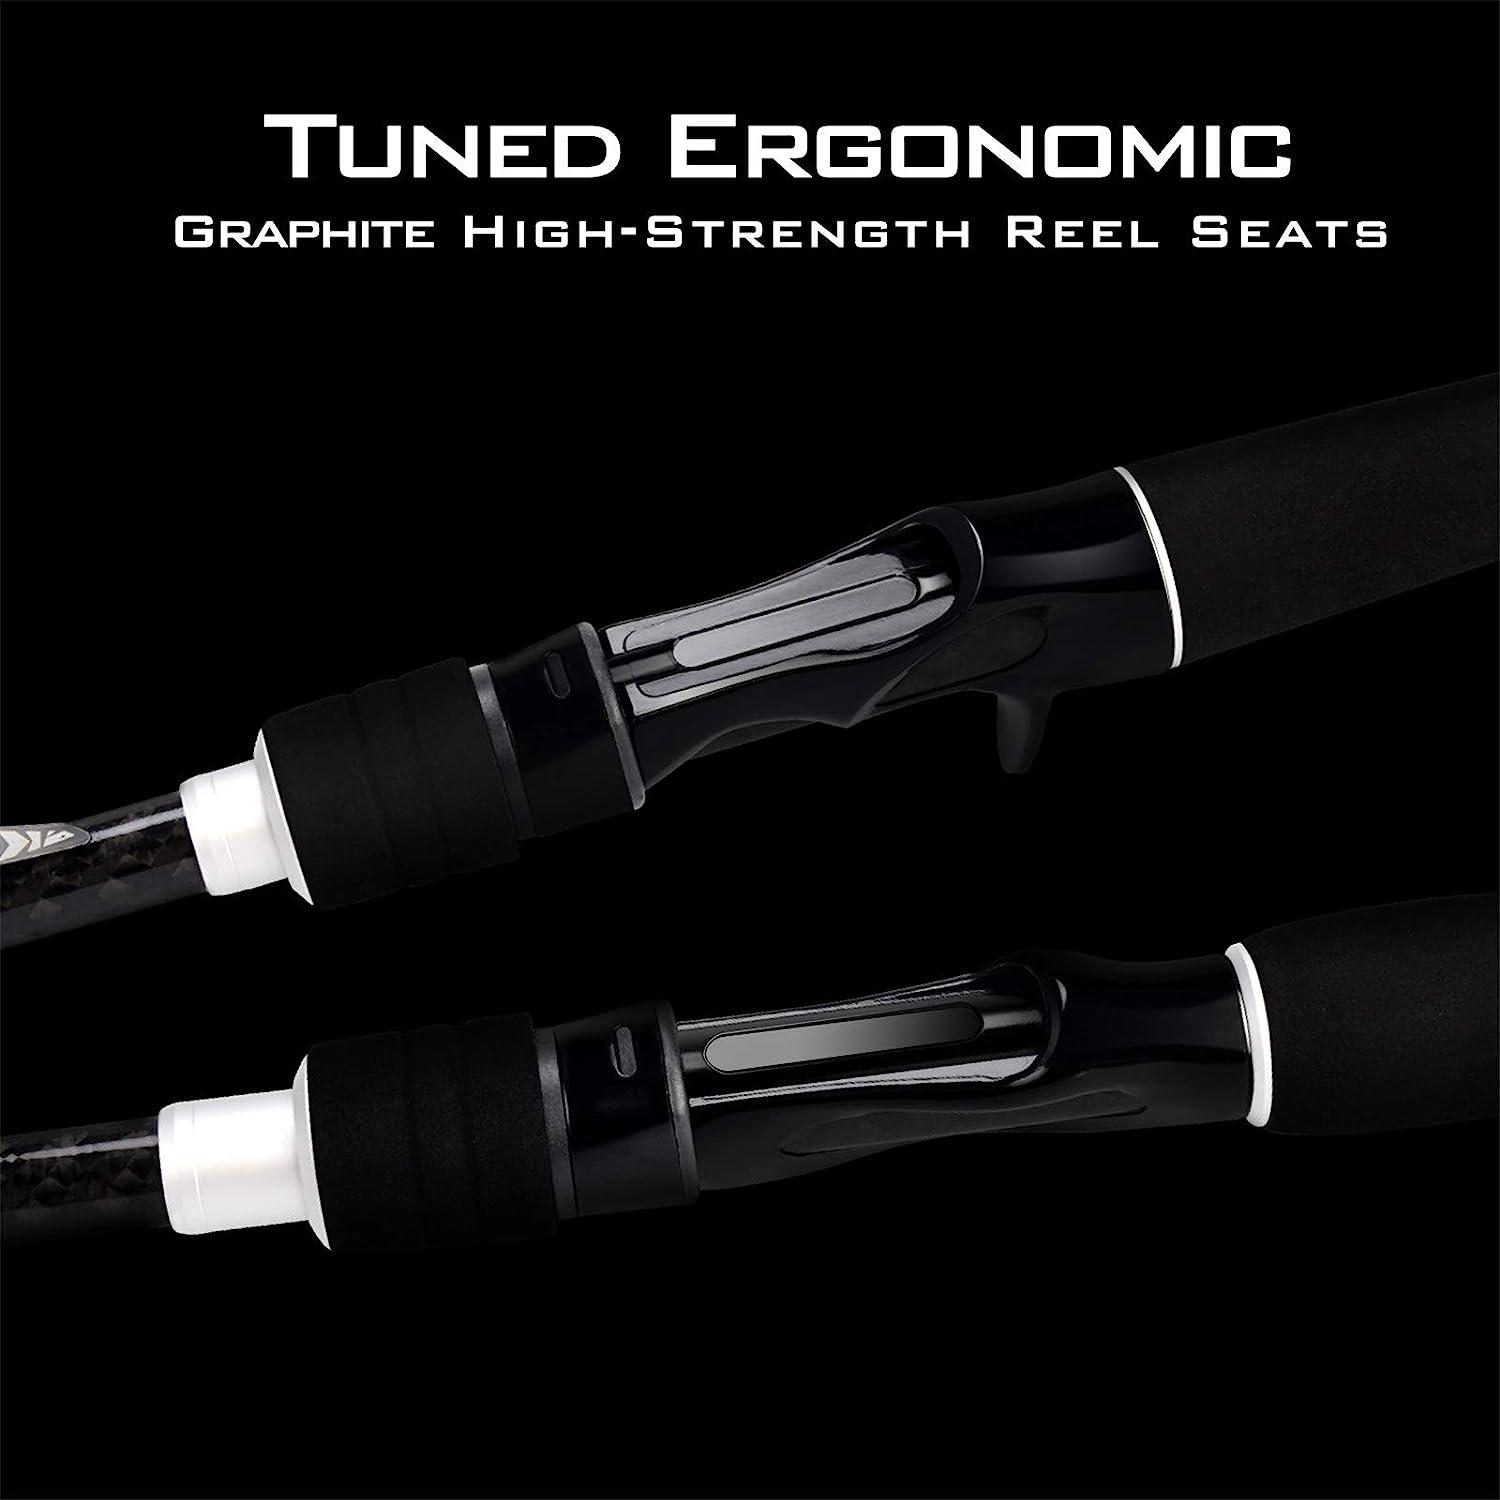 KastKing Perigee II Fishing Rods - Fuji O-Ring Line Guides, 24 Ton Carbon  Fiber Casting and Spinning Rods - Two Pieces,Twin-Tip Rods and One Piece  Rods A:spin Twin-tip 7'-ml&m-fast(2tips+1 Butt Section)